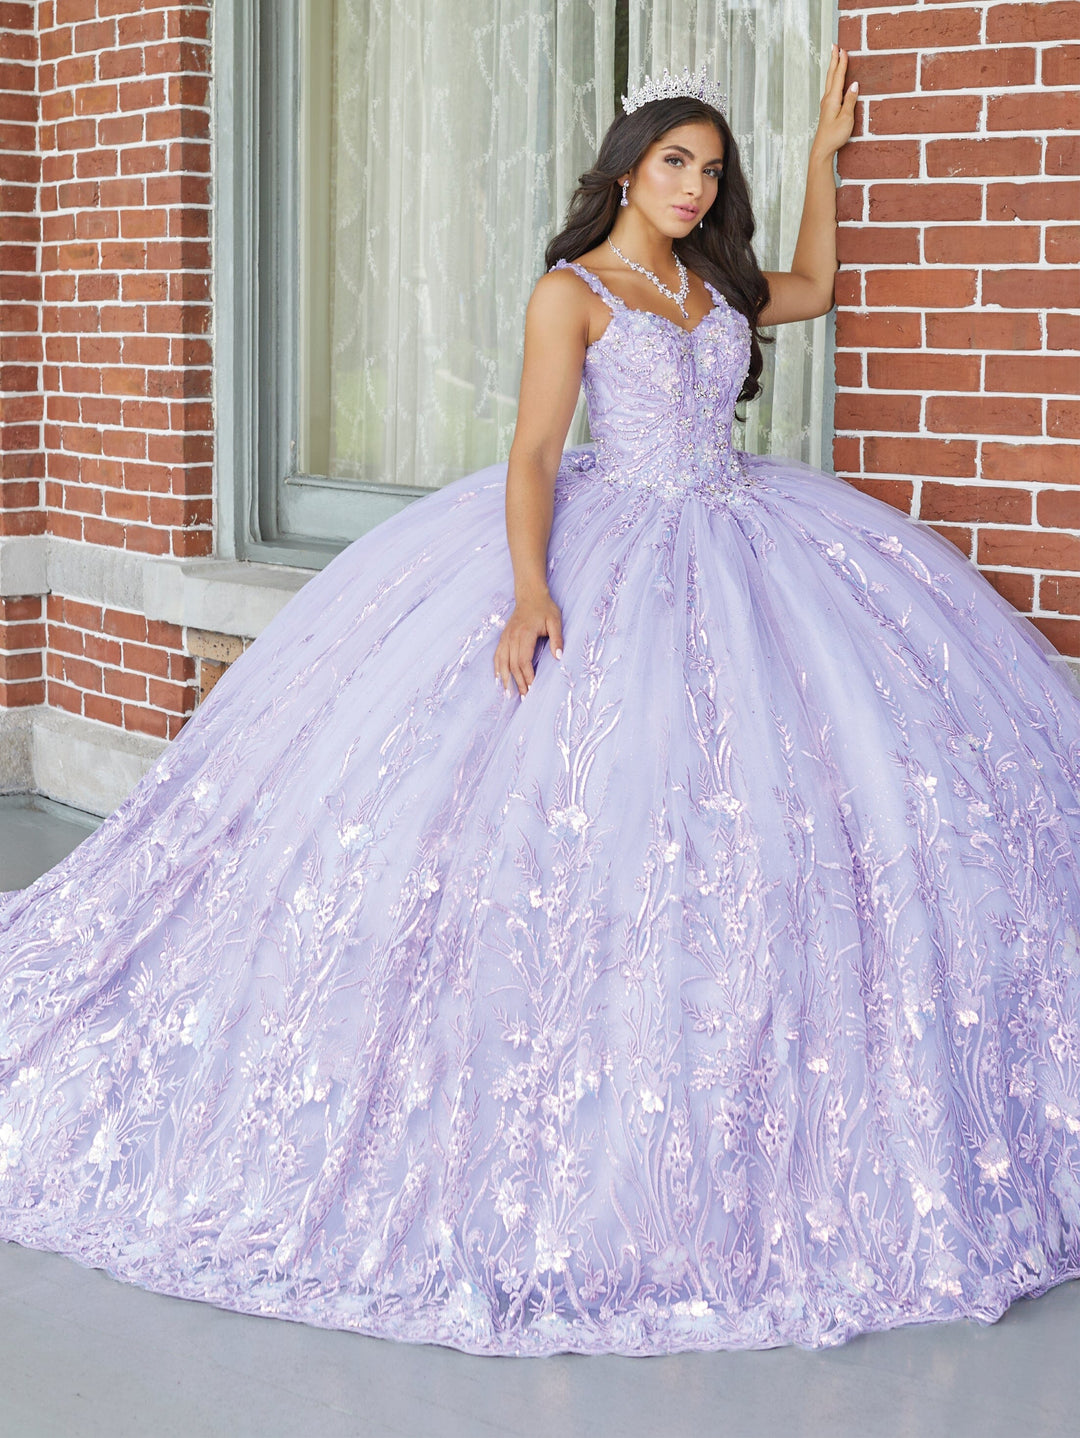 Applique Sleeveless Quinceanera Dress by House of Wu 26050